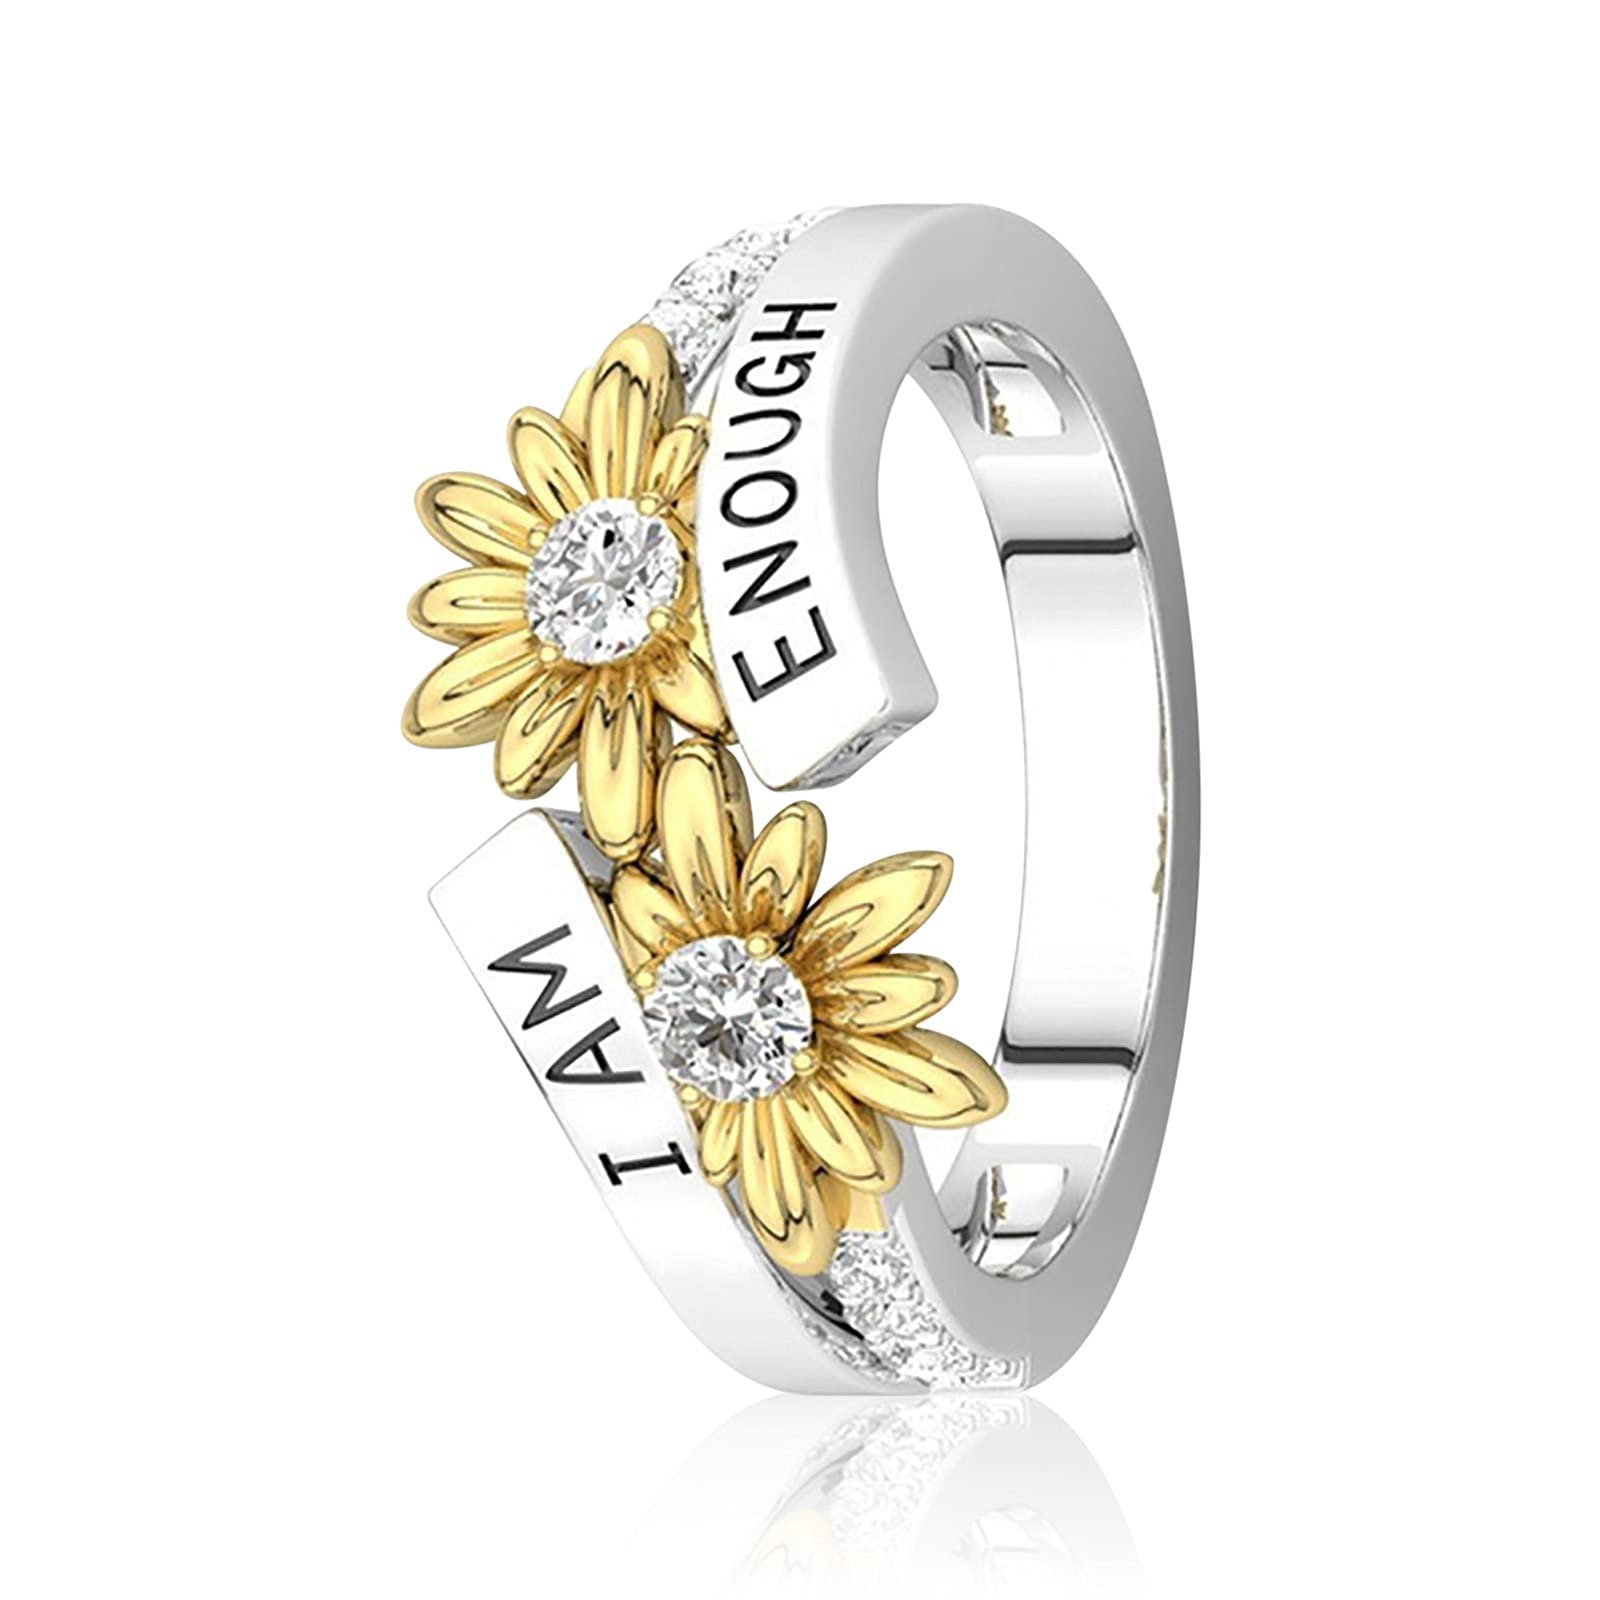 ManRiver Sunflower Rings for Women - I Am Enough Letters Carving Flower Promise Rings Jewelry Accessory Gifts Size 5-11